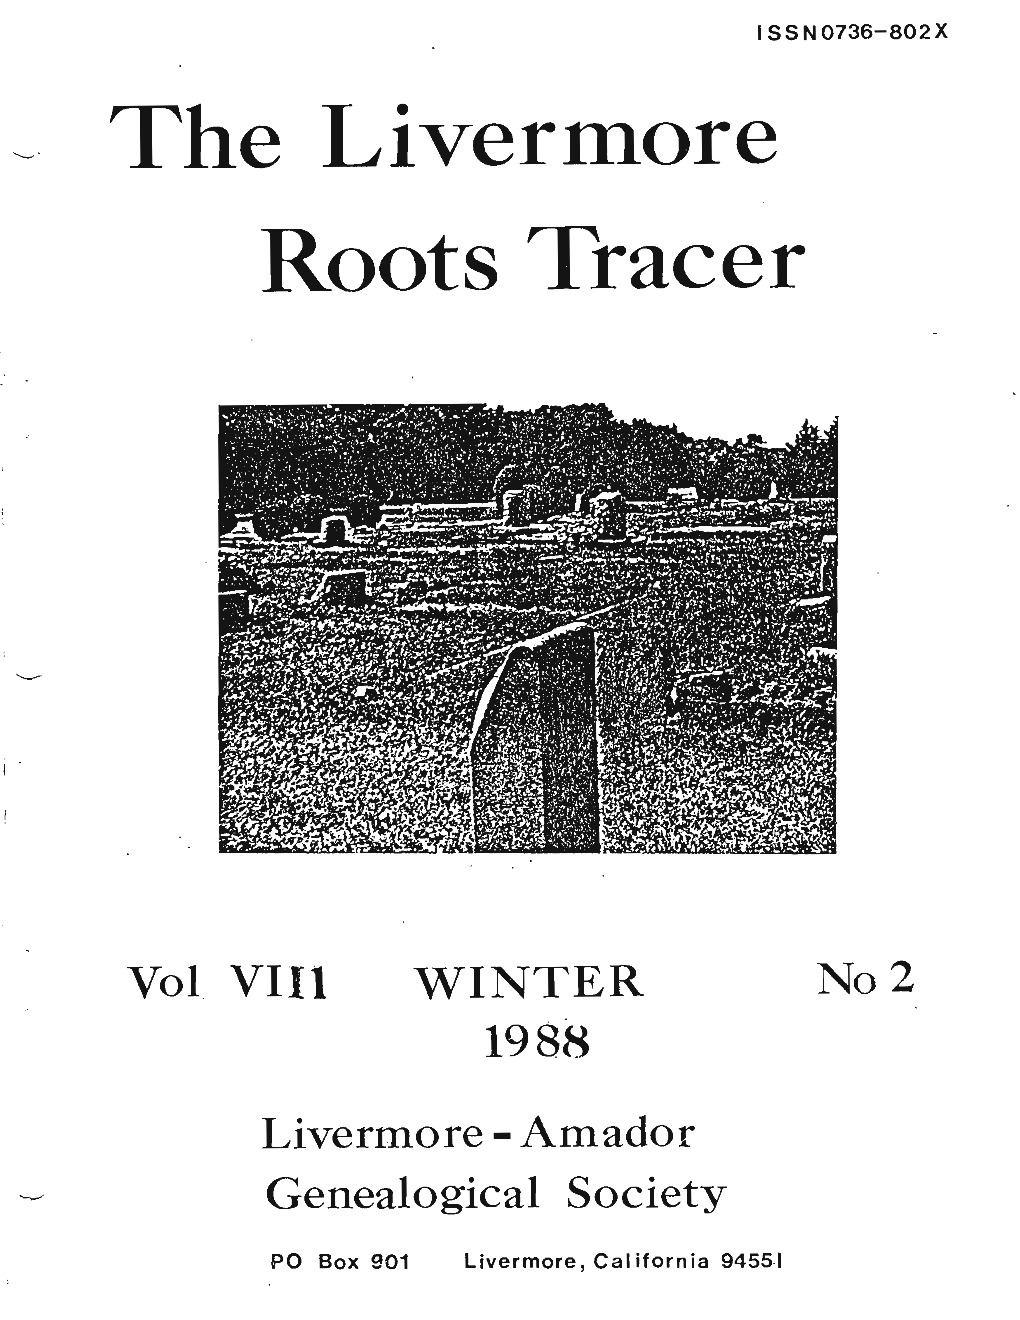 The Livermore Roots Tracer Vol VIII No 2 Winter 1988